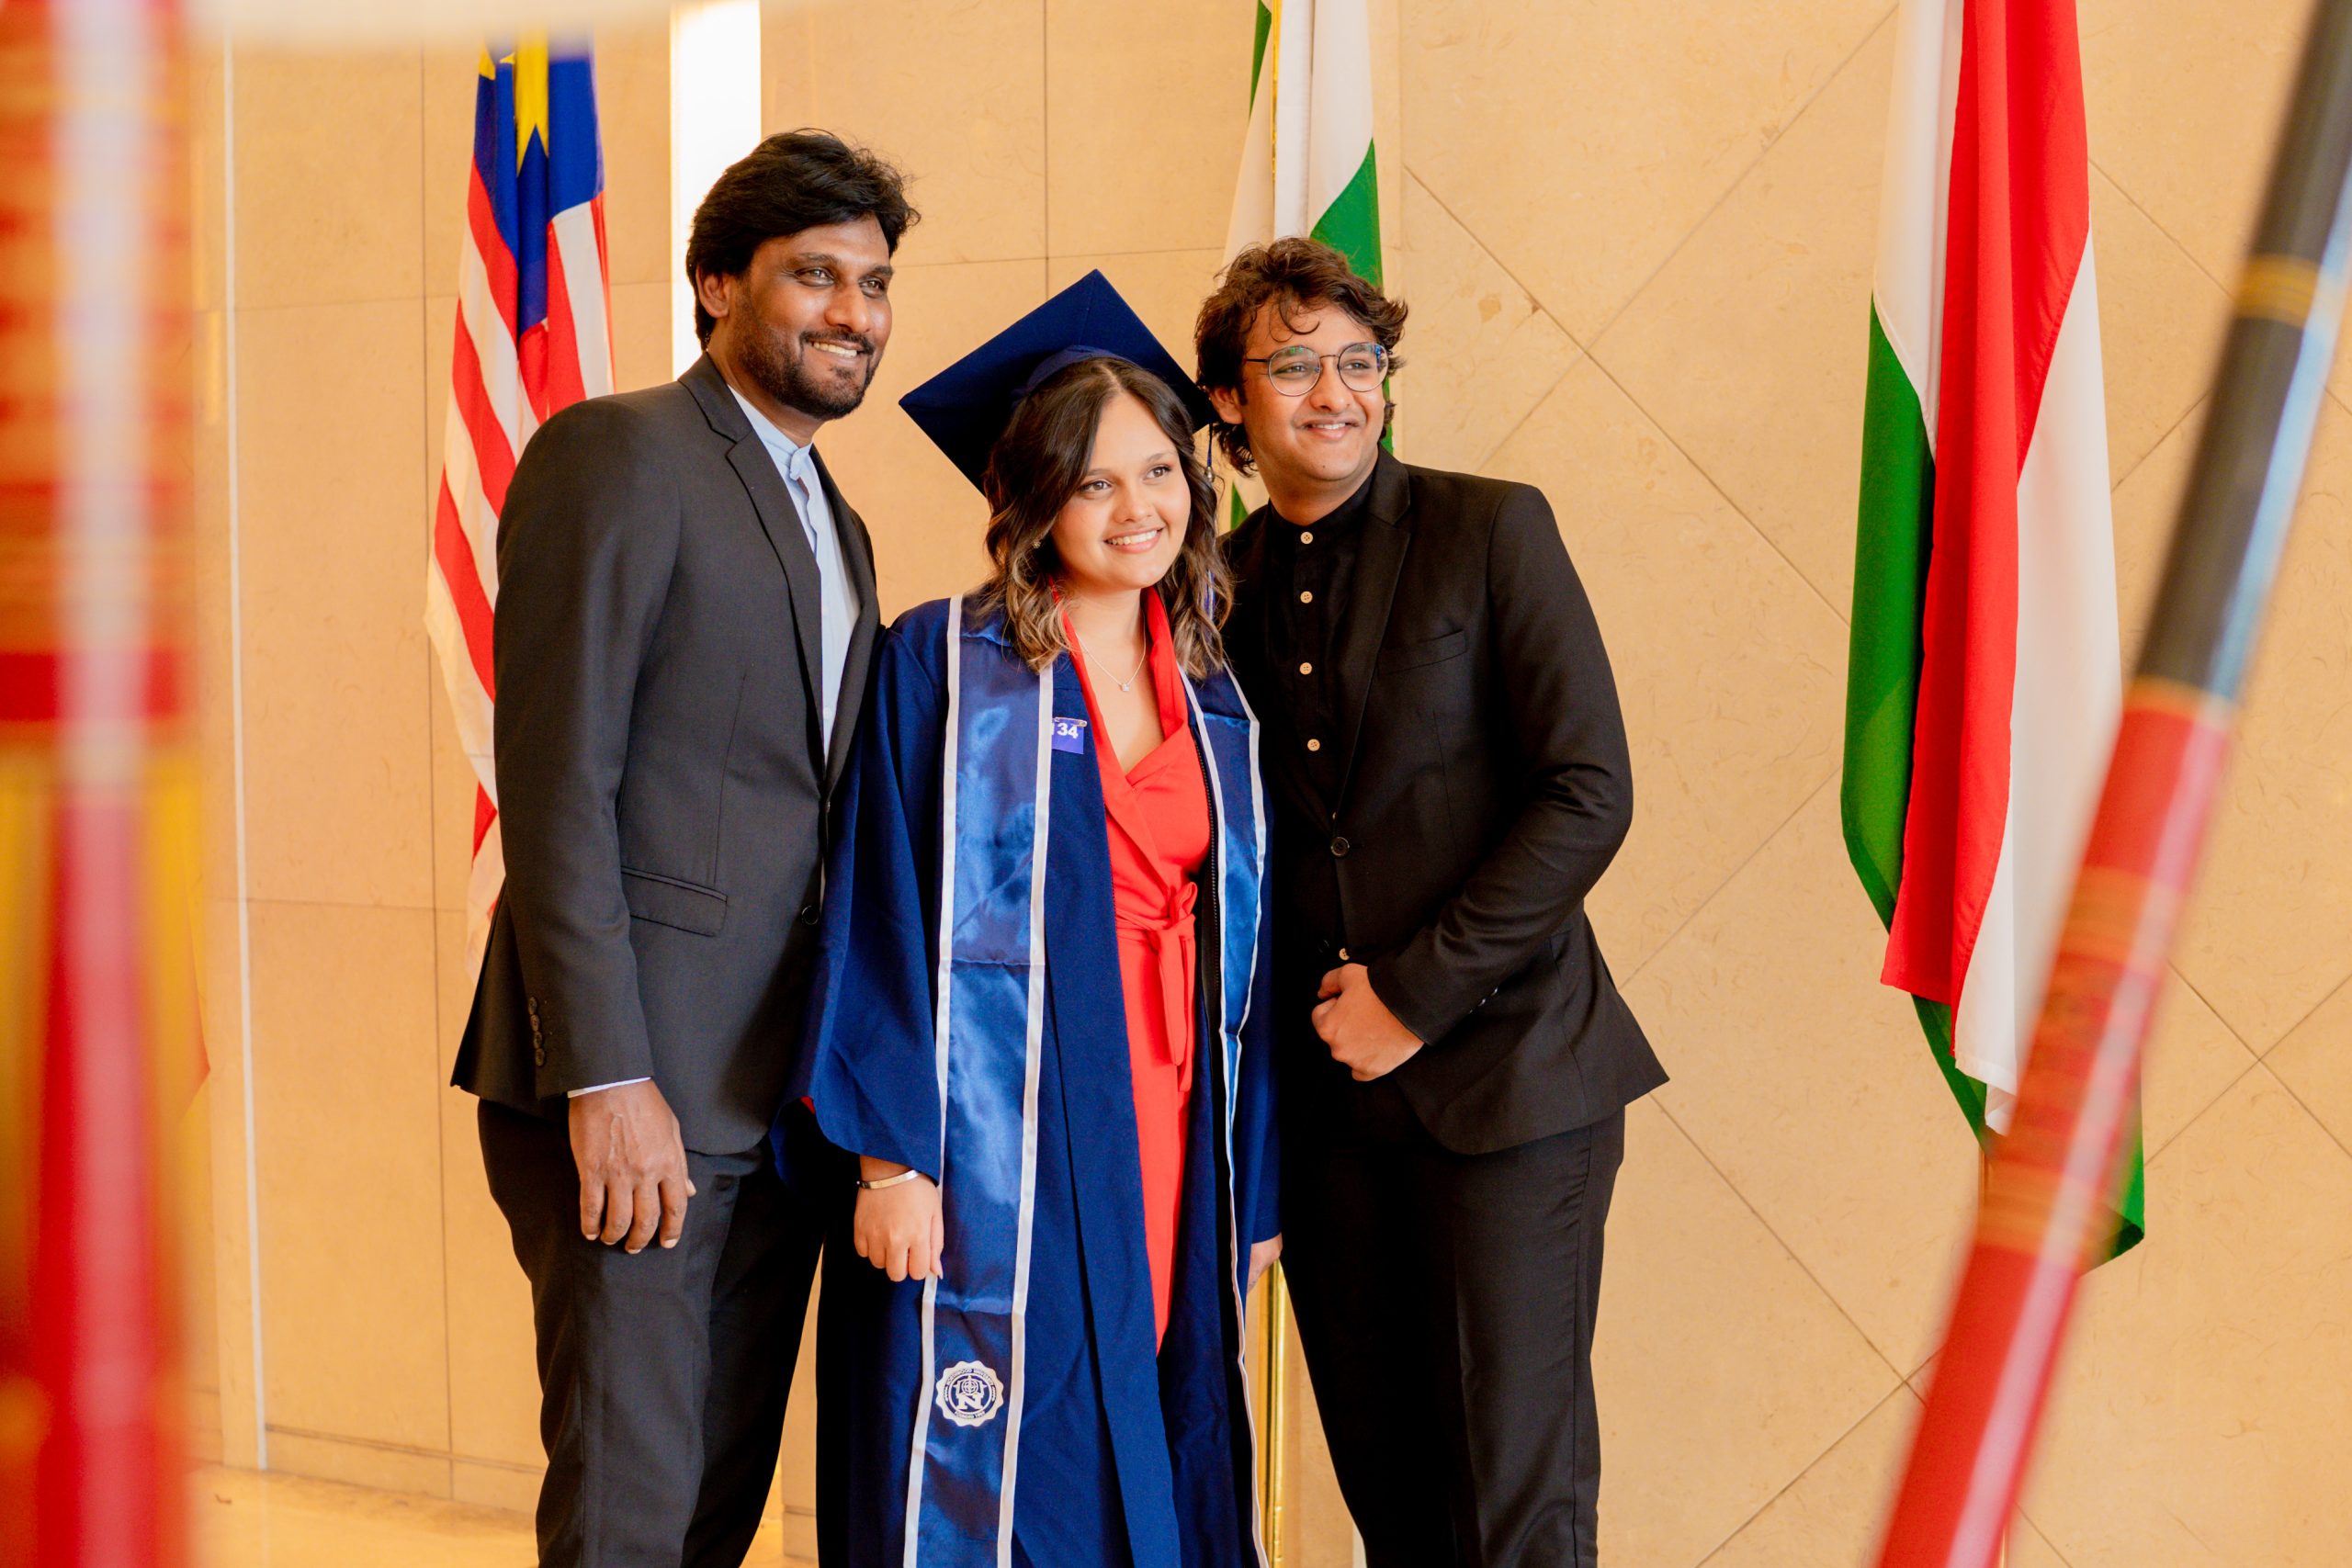 Northwood International graduate pictured with family from India